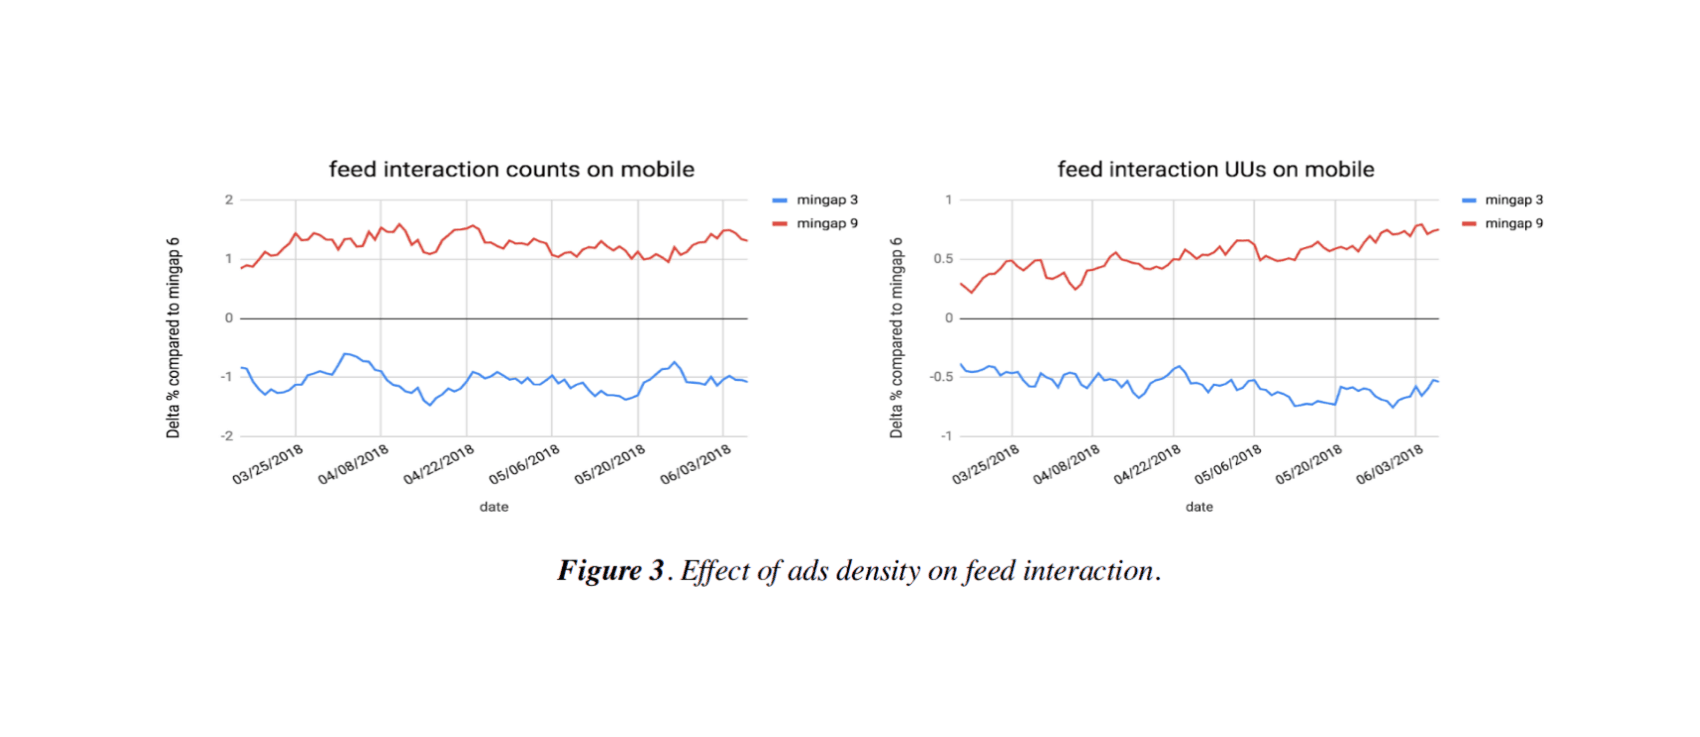 Yan et al 2019, on the harms of advertising on LinkedIn: “Figure 3. Effect of ads density on feed interaction”